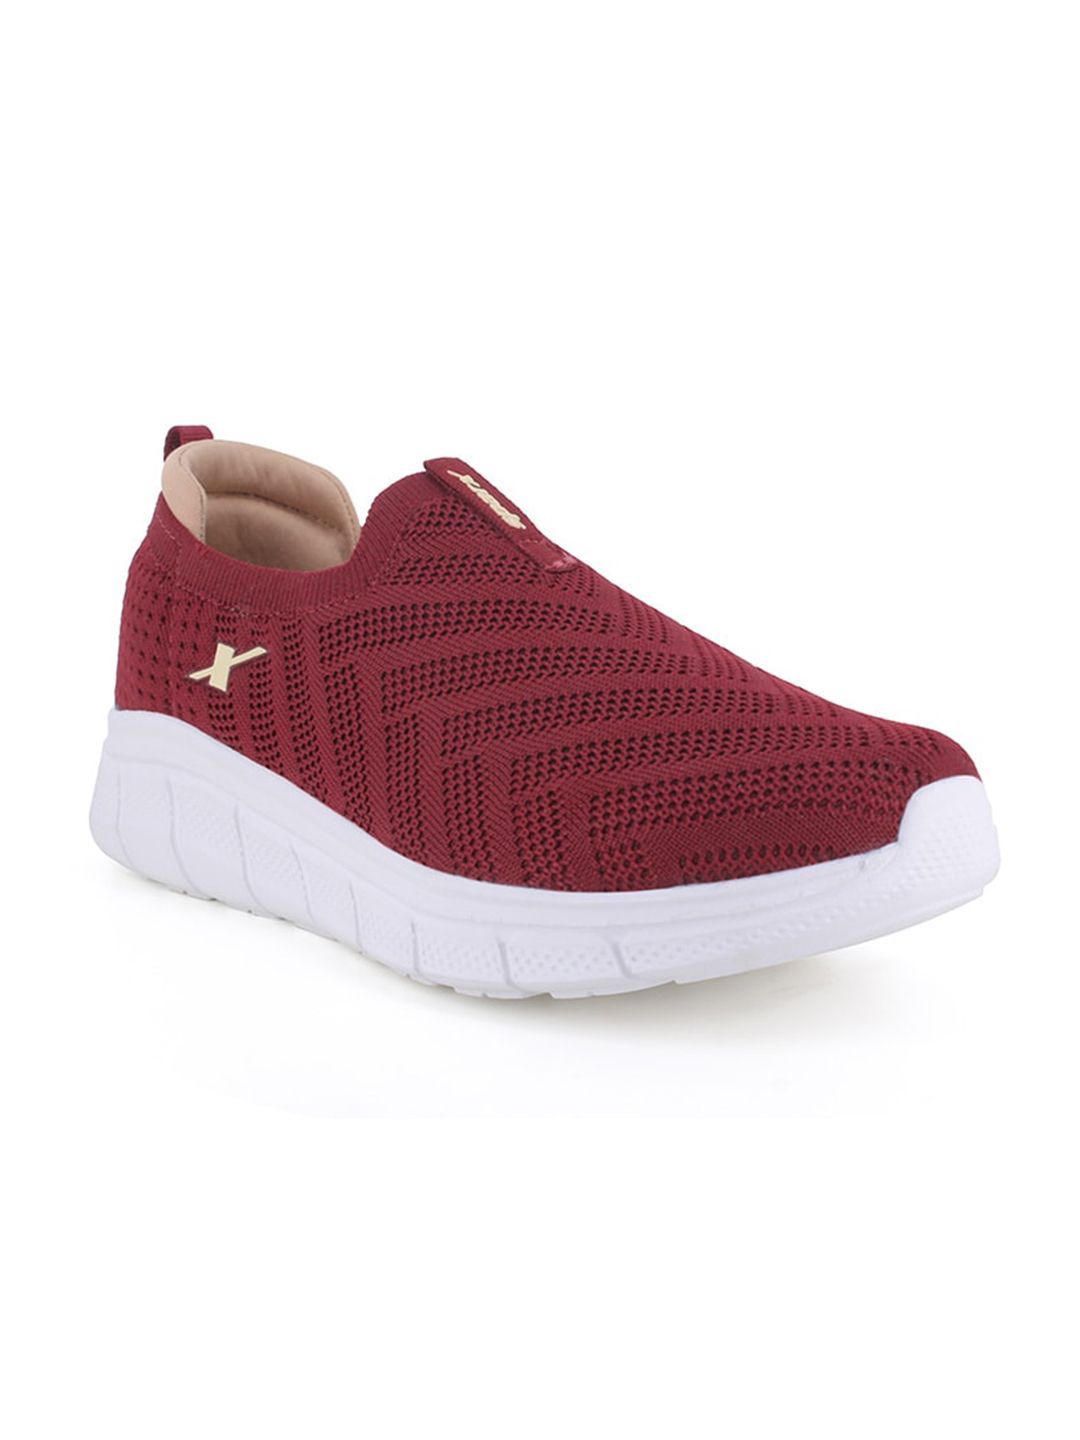 Sparx Women Textile Running Non-Marking Sports Shoes Price in India